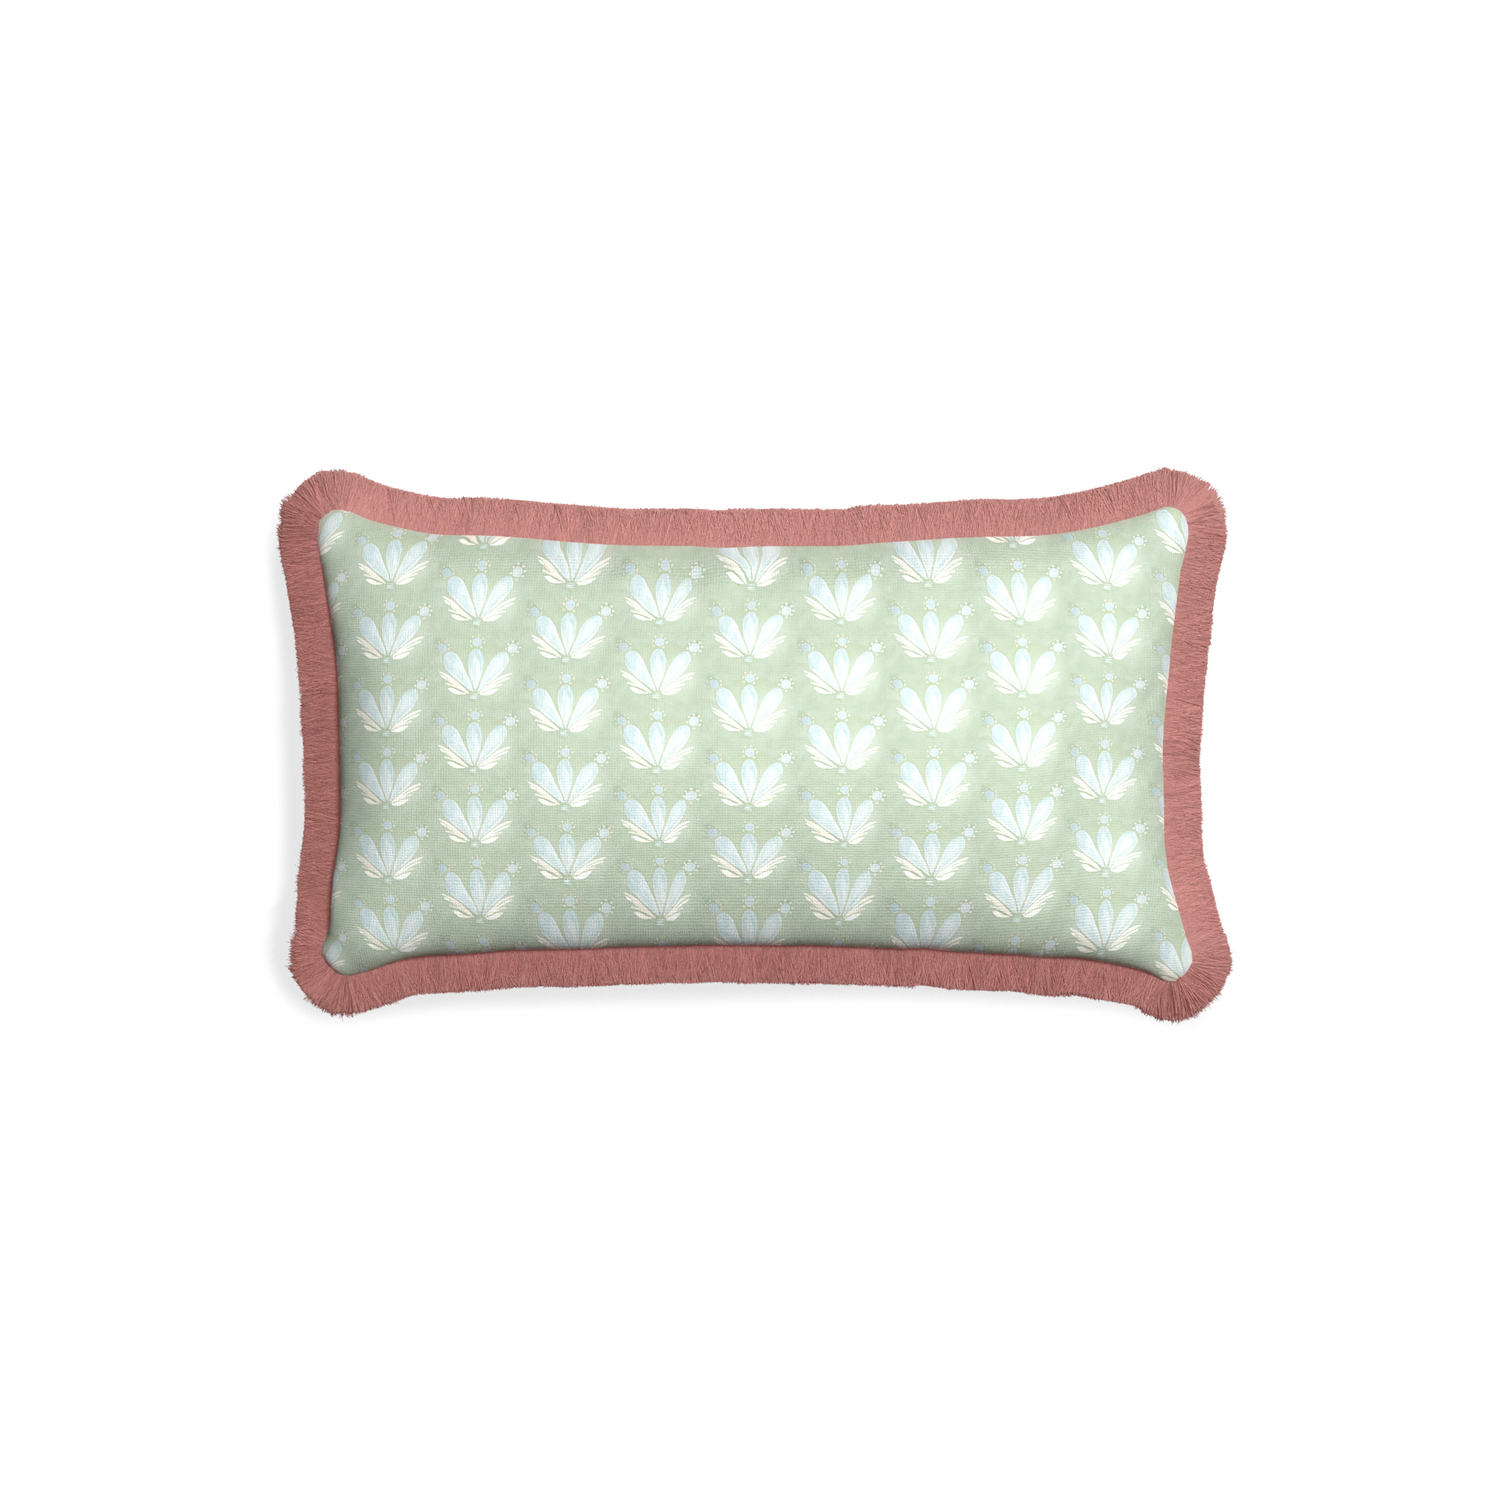 Petite-lumbar serena sea salt custom blue & green floral drop repeatpillow with d fringe on white background